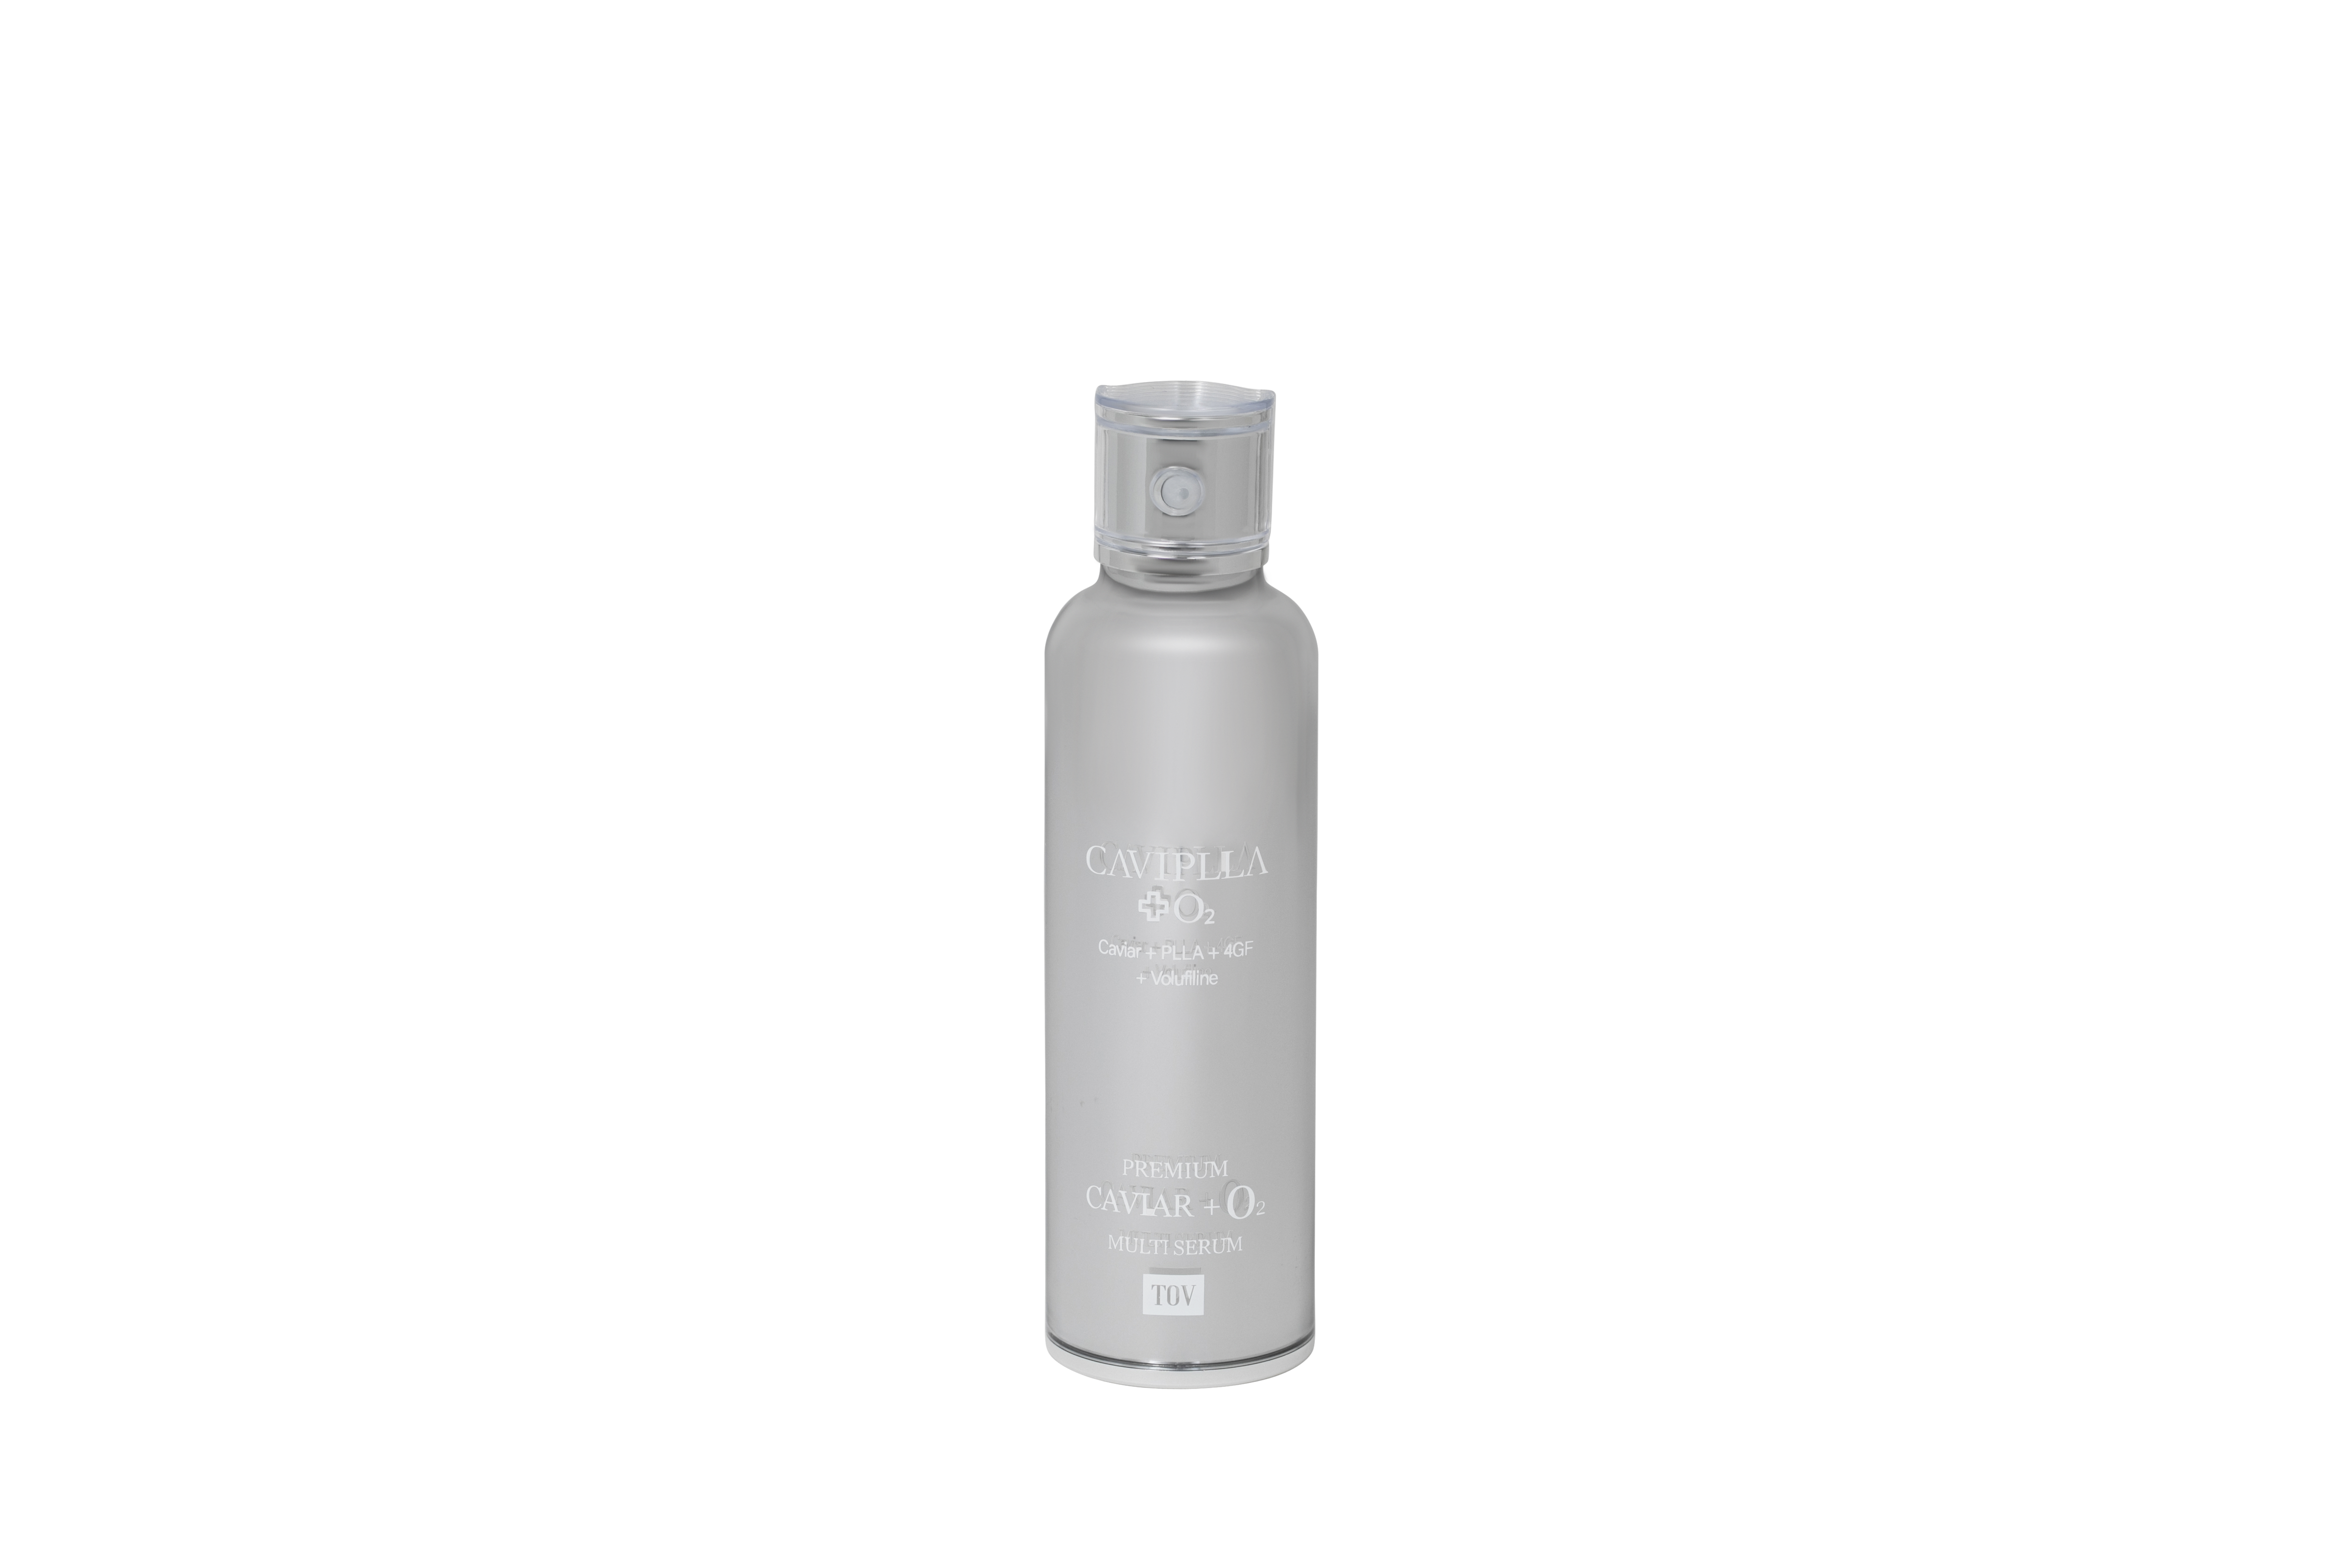 HOUSE OF PLLA® CAVIPLLA+O2® Multi-Serum 120ml Retail $200 - SPECIAL OFFER